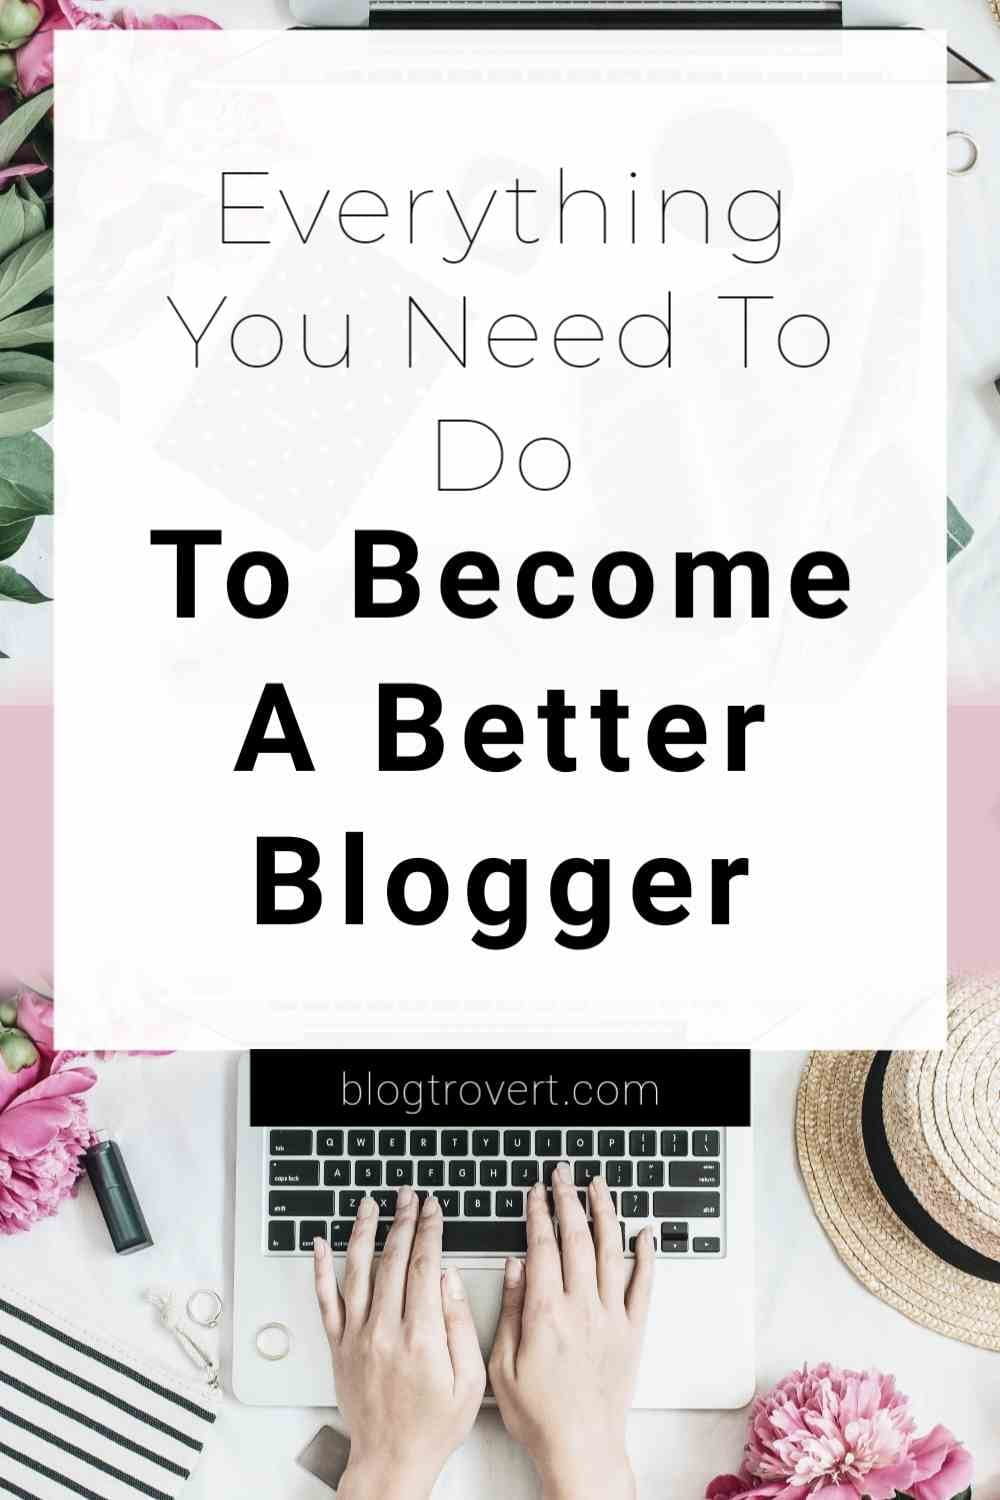 How To Become a Better Blogger - 13 helpful guides for Amateur bloggers 6